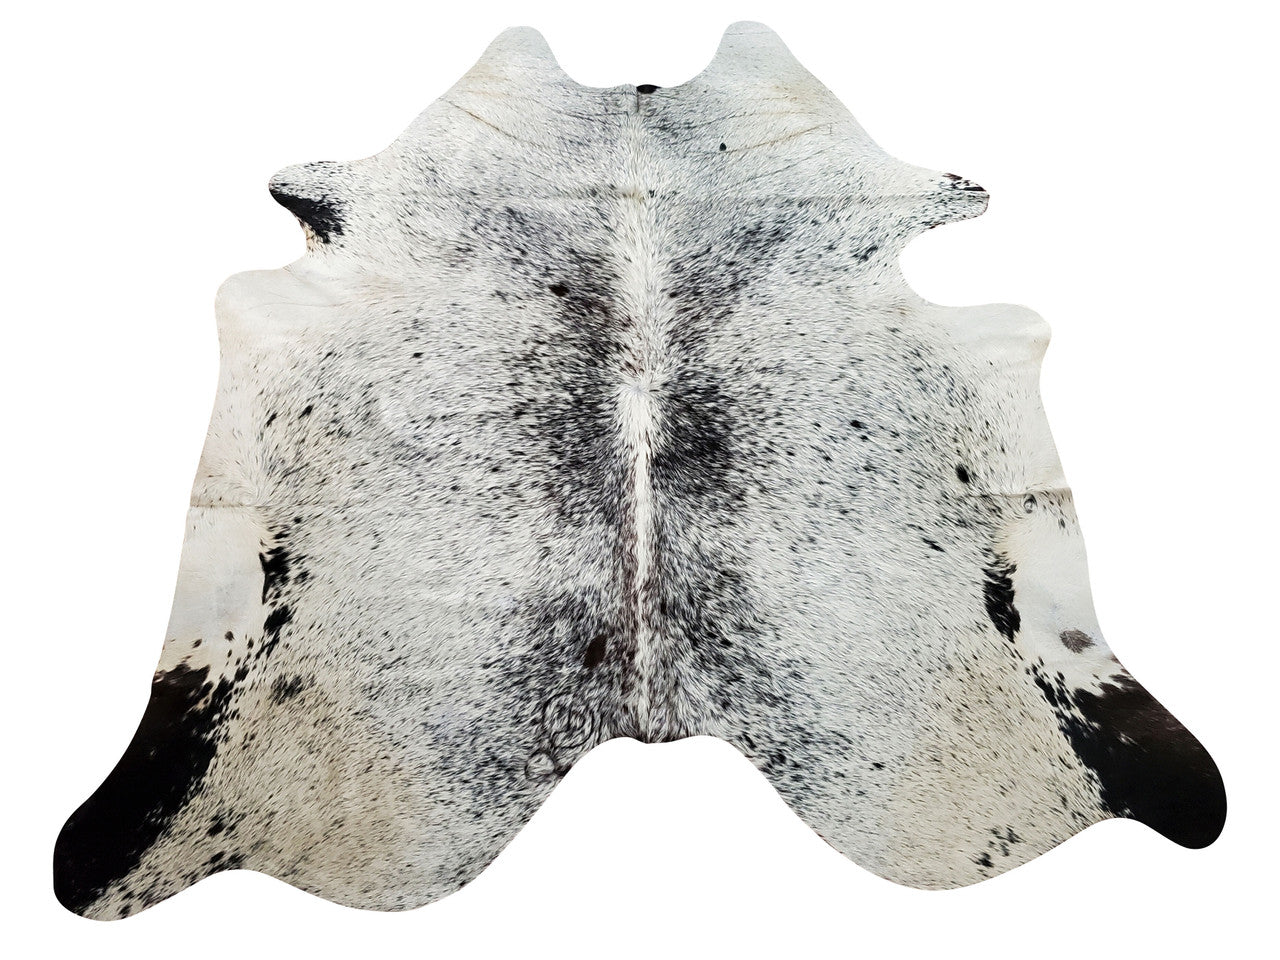 This is a strikingly attractive cowhide rug, free shipping all over Canada. The numerous colors and designs in this pattern, combined with the excellent craftsmanship, make it an excellent product. It's helped by its compact size and bright colors, which allow it to be the perfect piece for any location.
